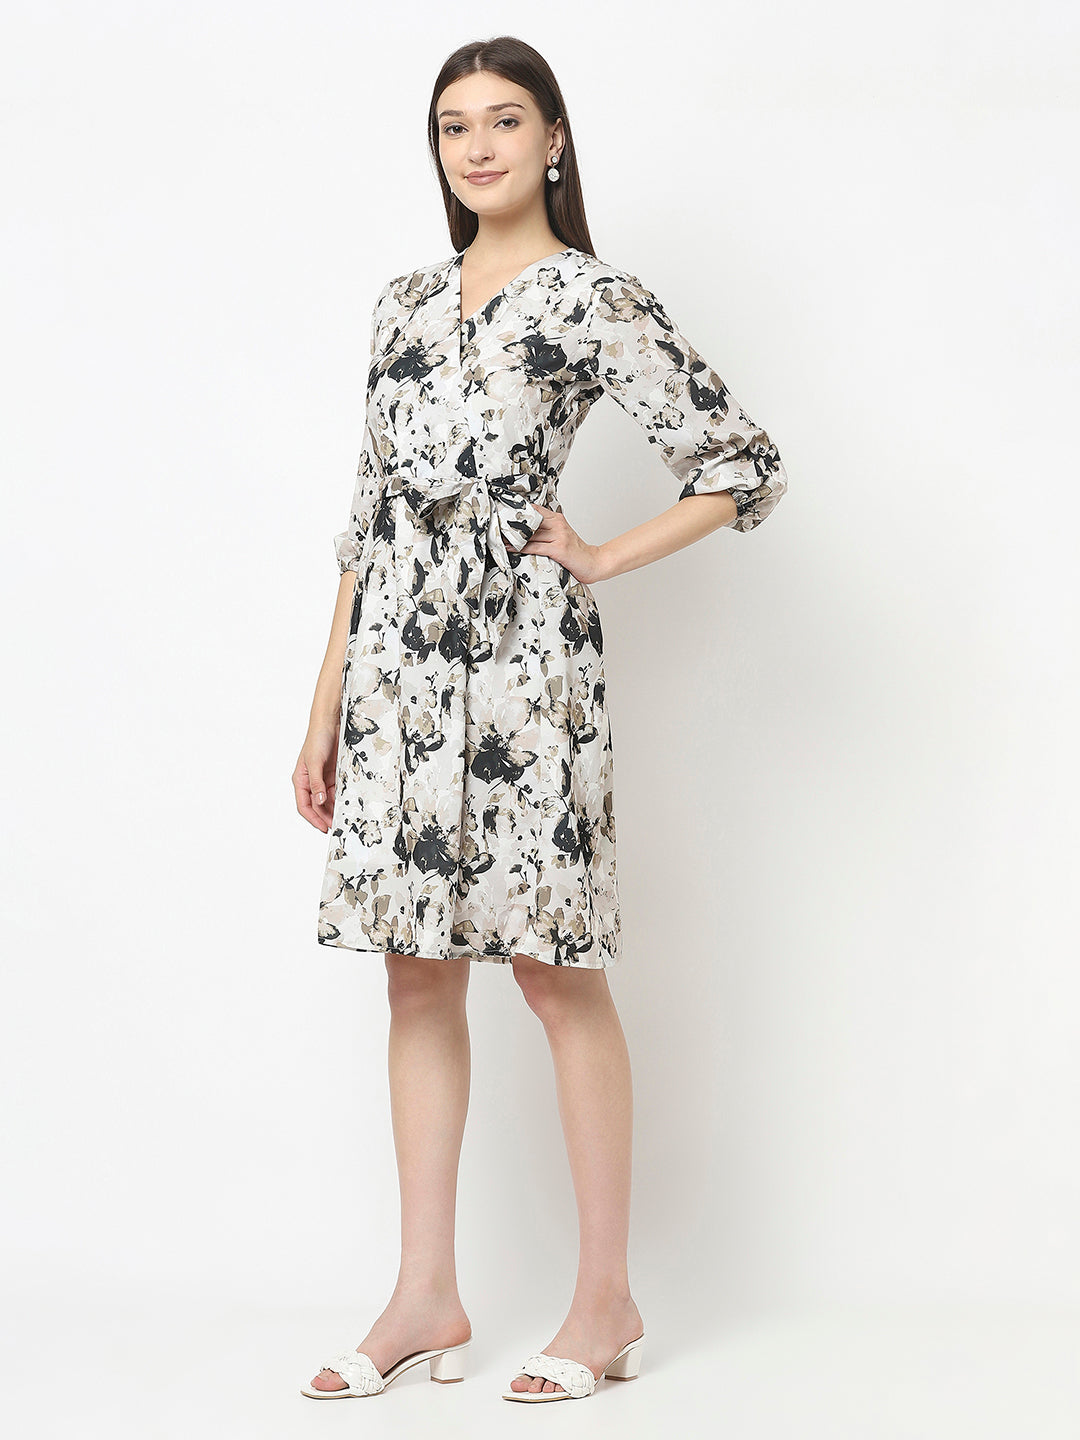 Off-White Floral Dress with Tie-Up Detail